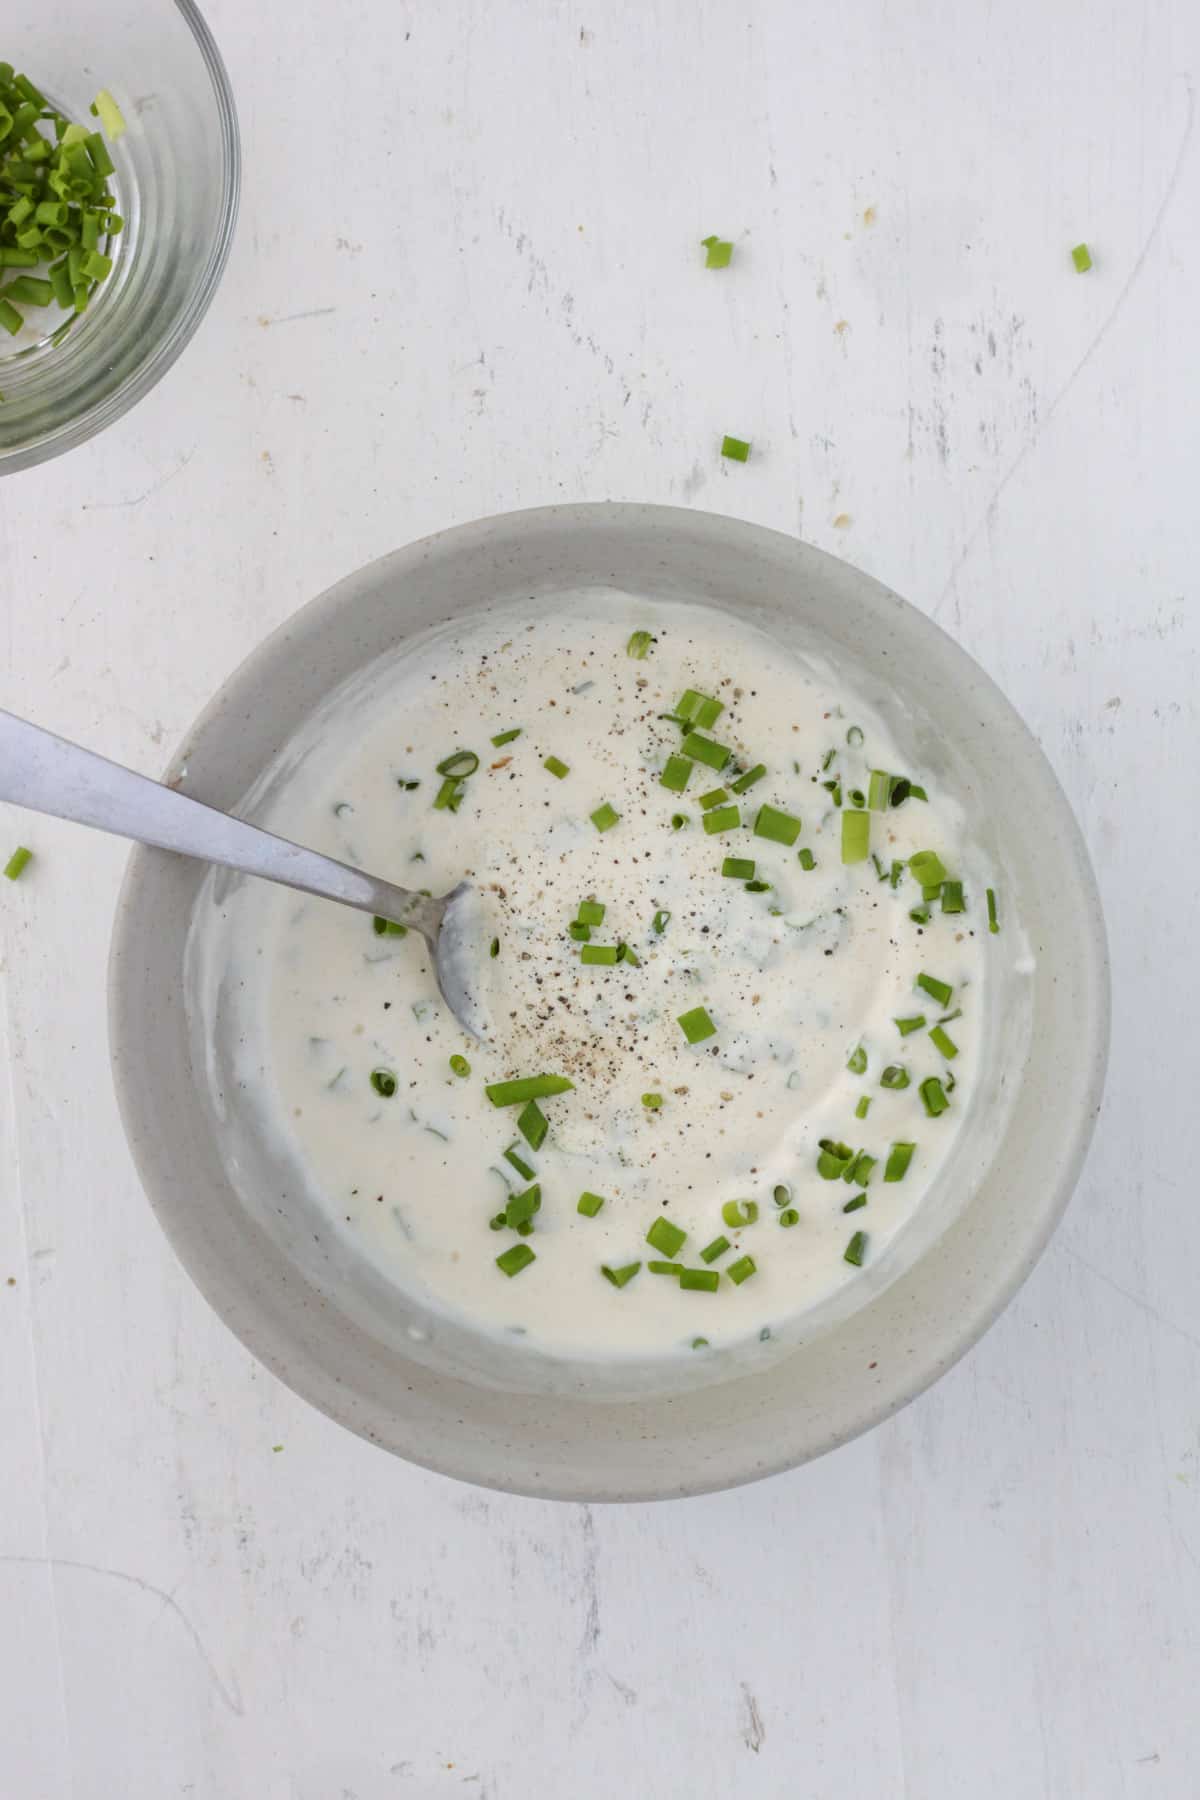 Homemade ranch dressing in a small bowl unmixed.